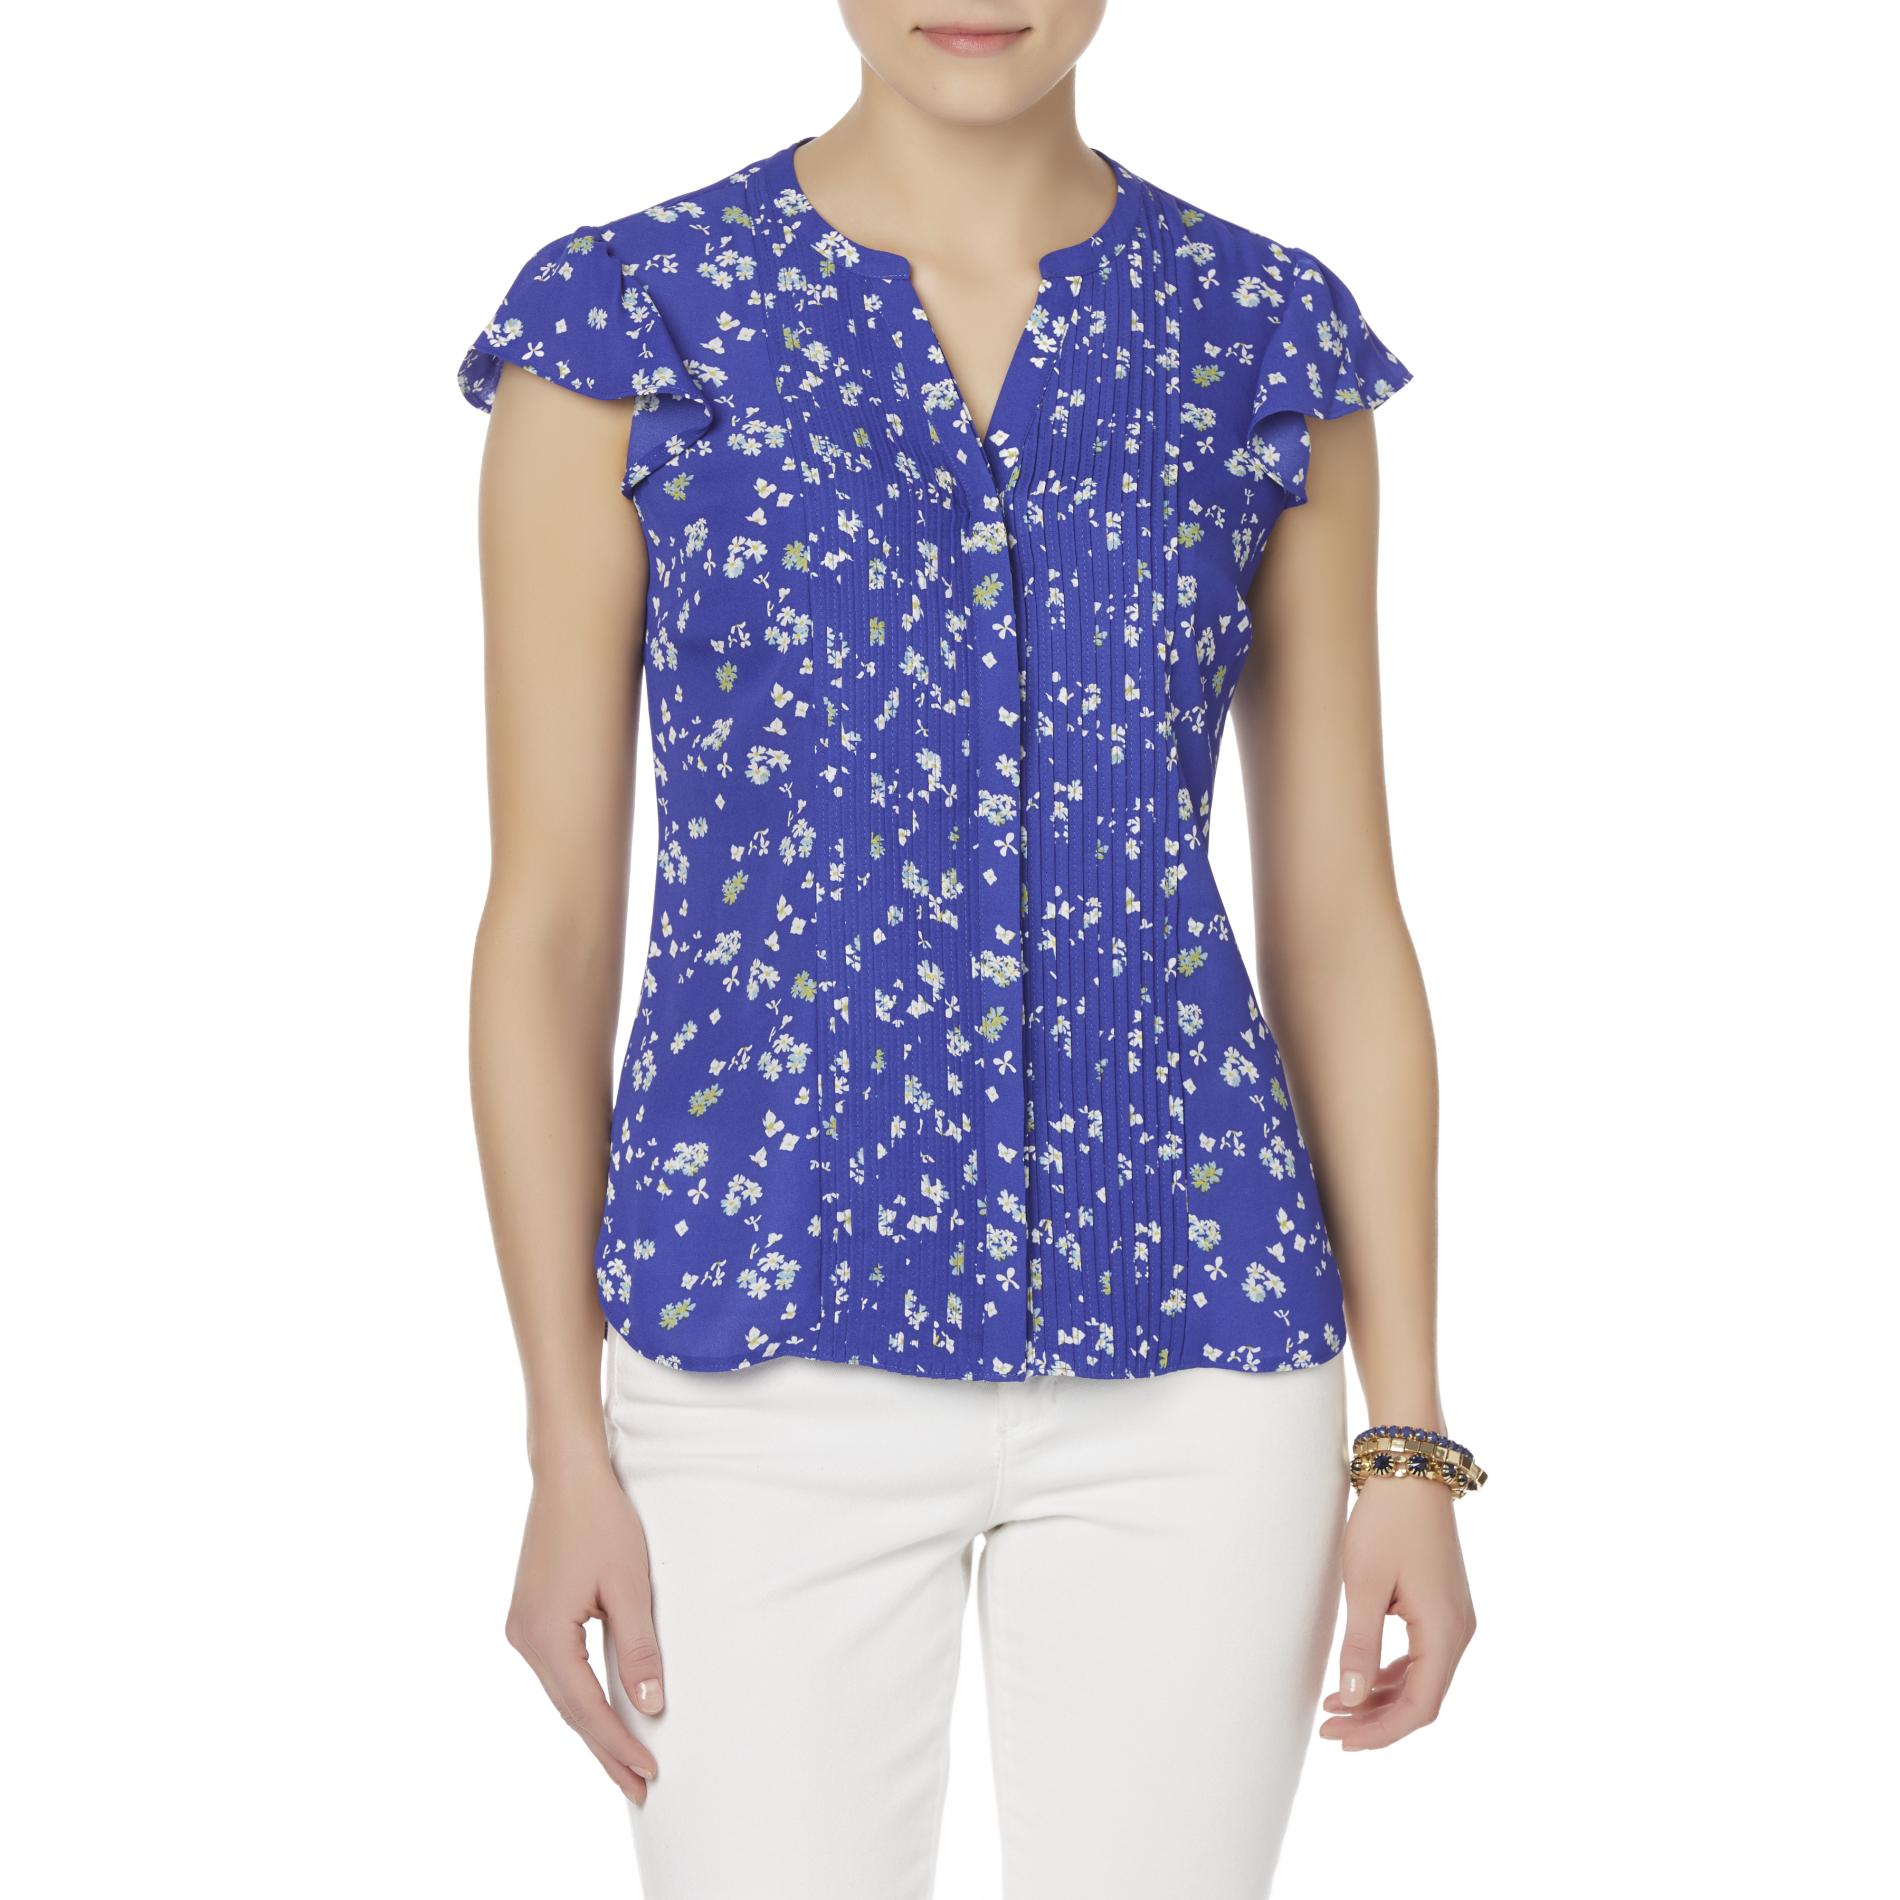 Simply Styled Women's Pleated Blouse - Floral